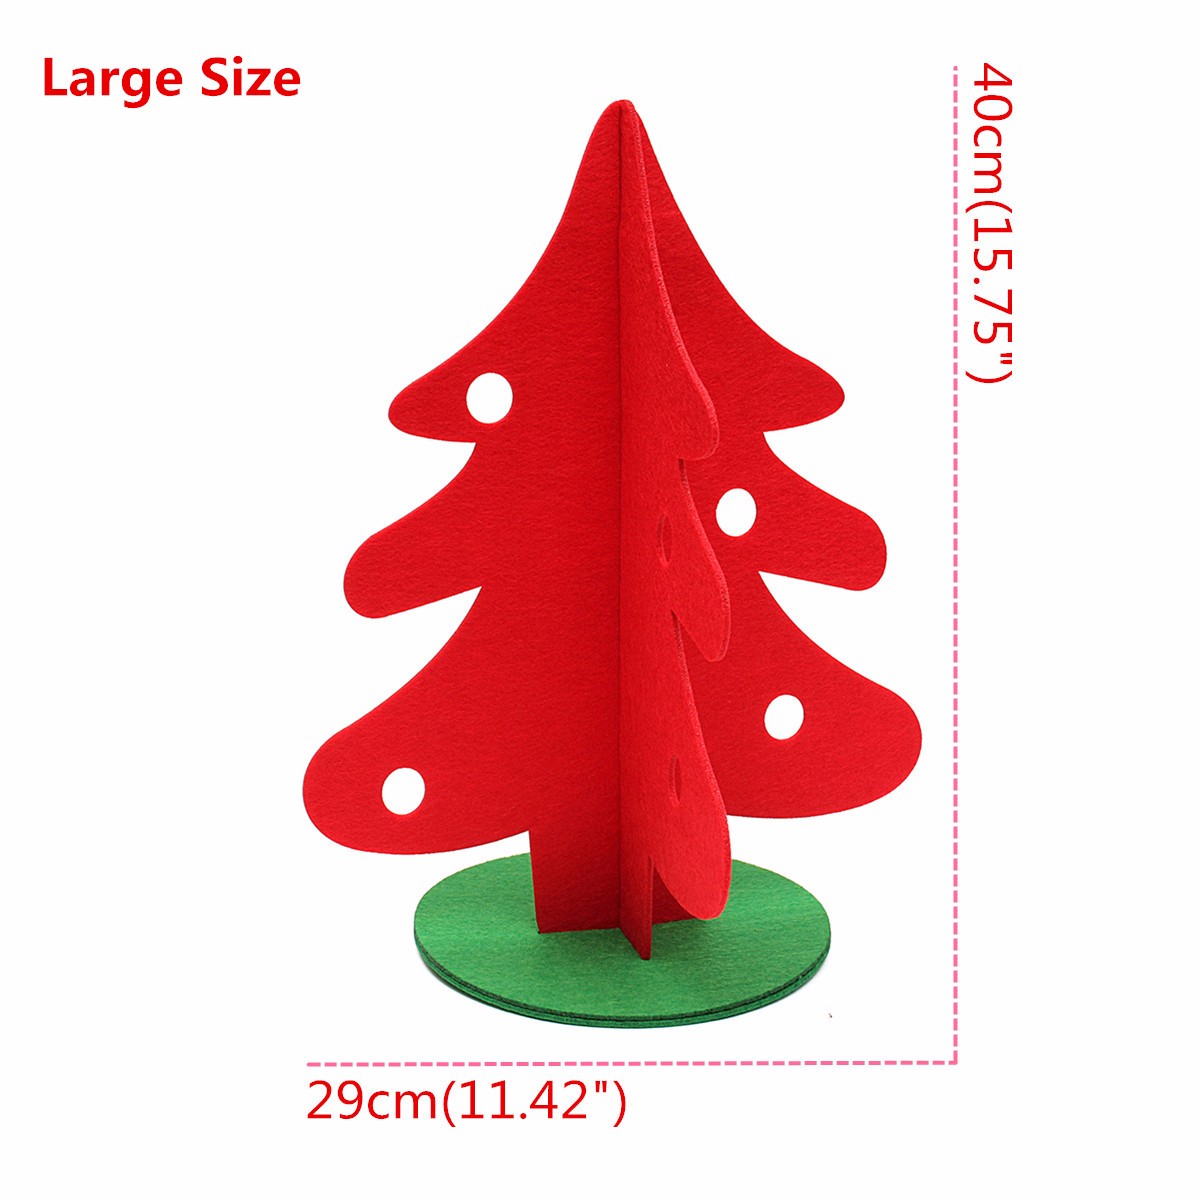 Vintage-Christmas-Tree-Home-Shop-Ornament-Decoration-Fabric-Red-Green-Tree-1103573-7